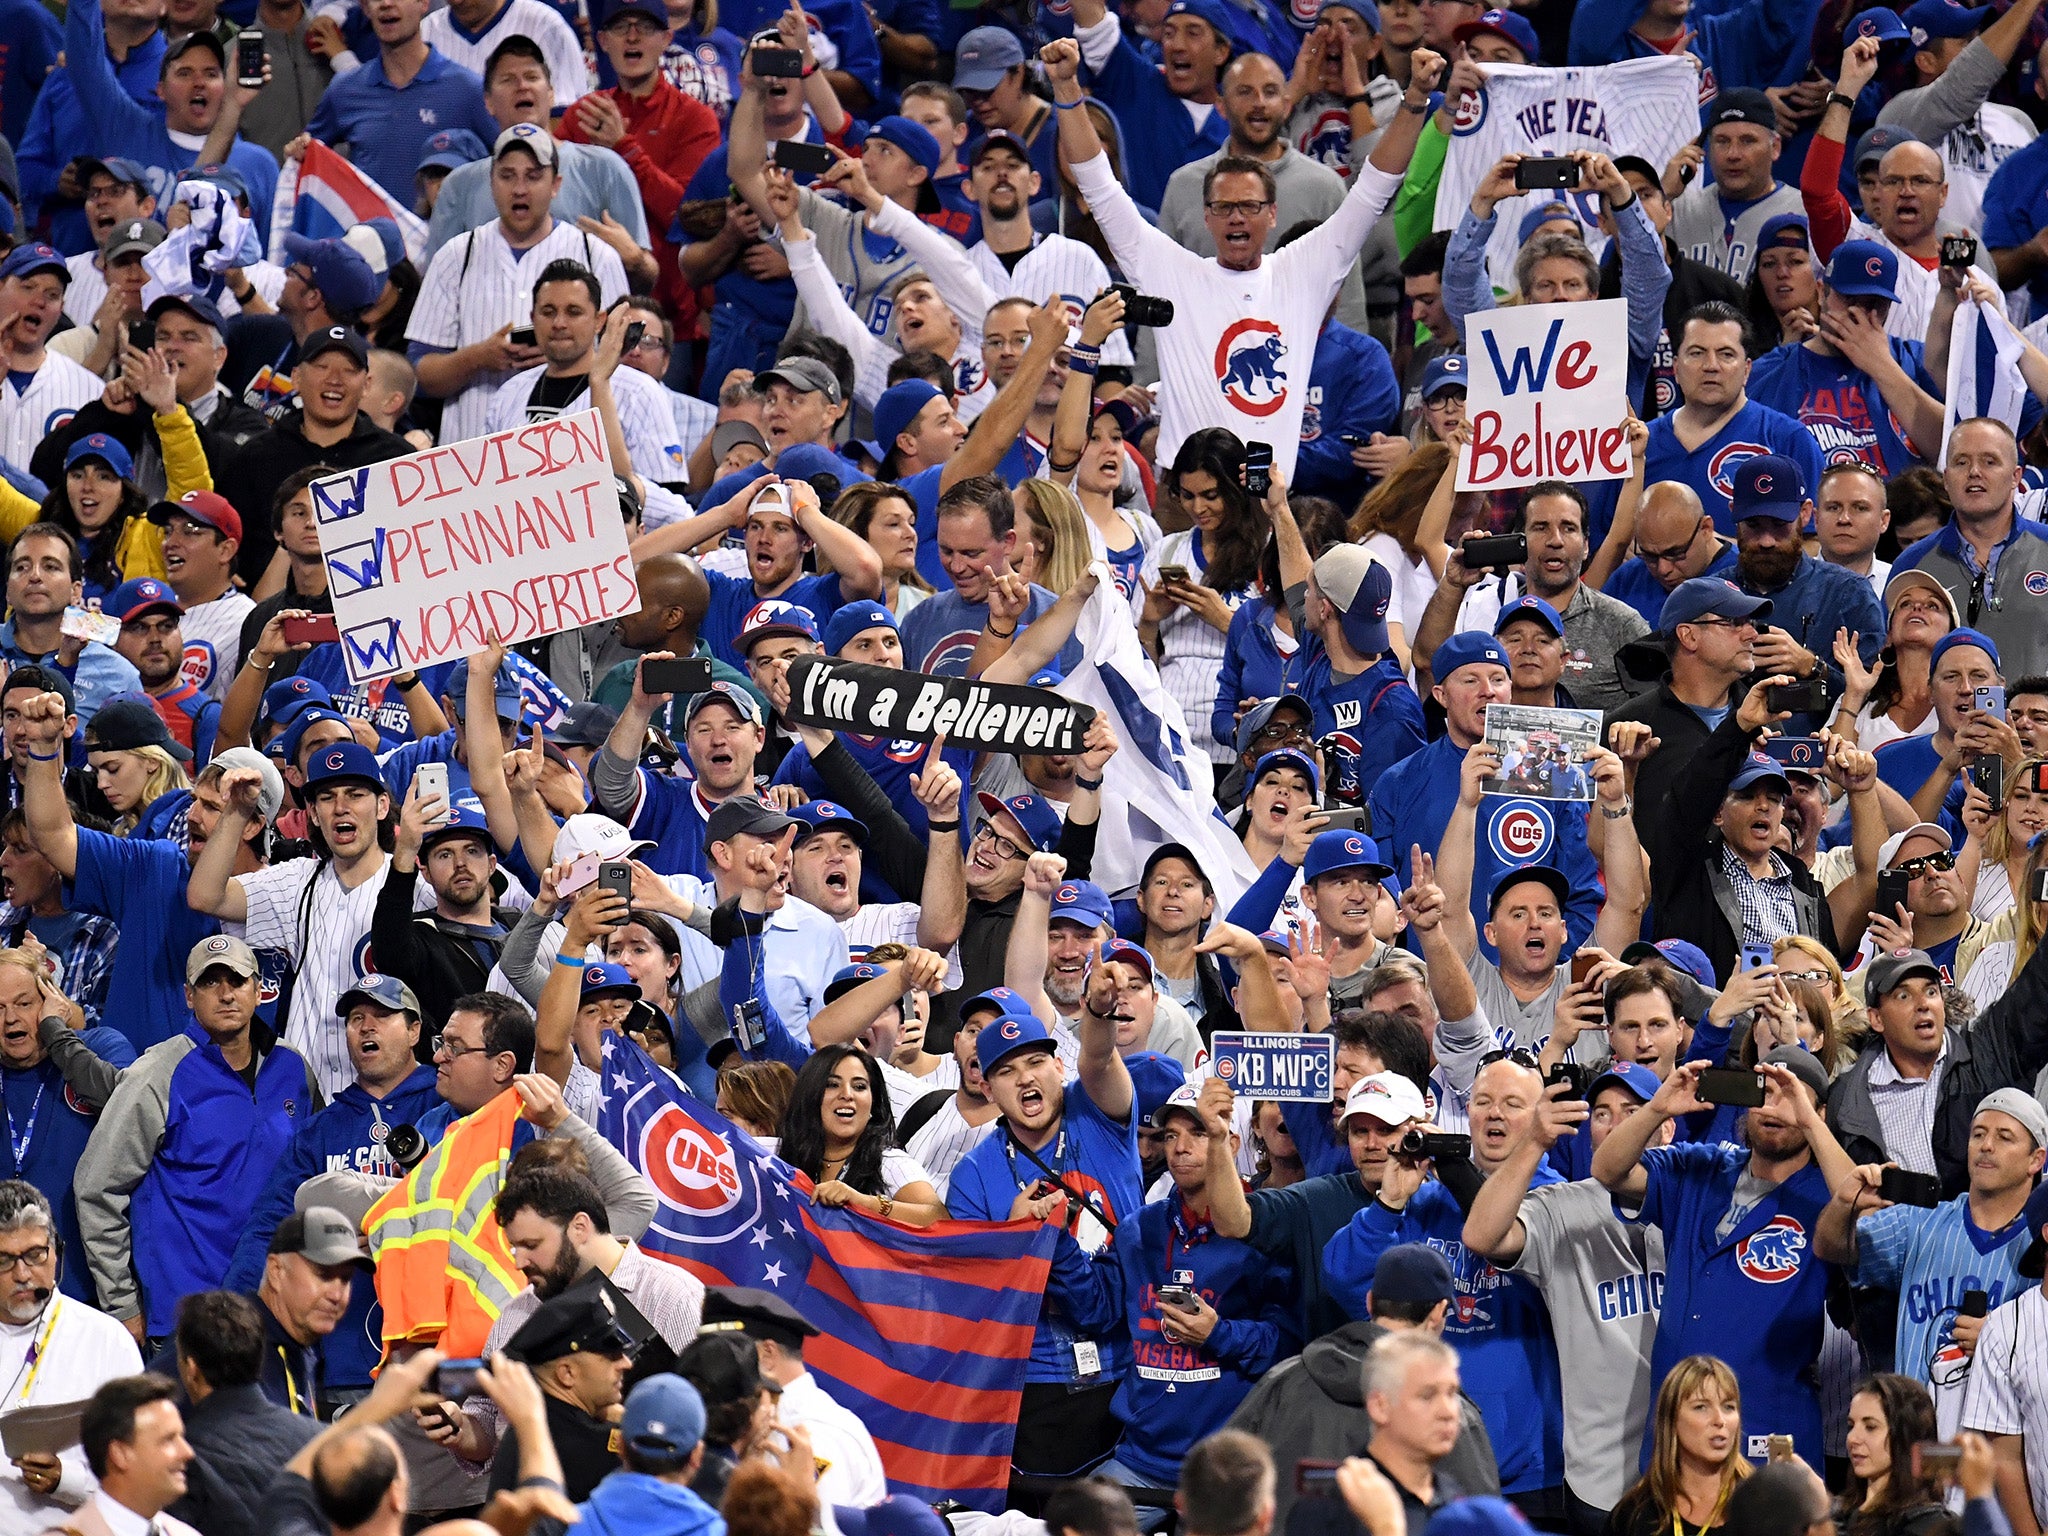 Chicago Cubs fans celebrate their historic World Series title